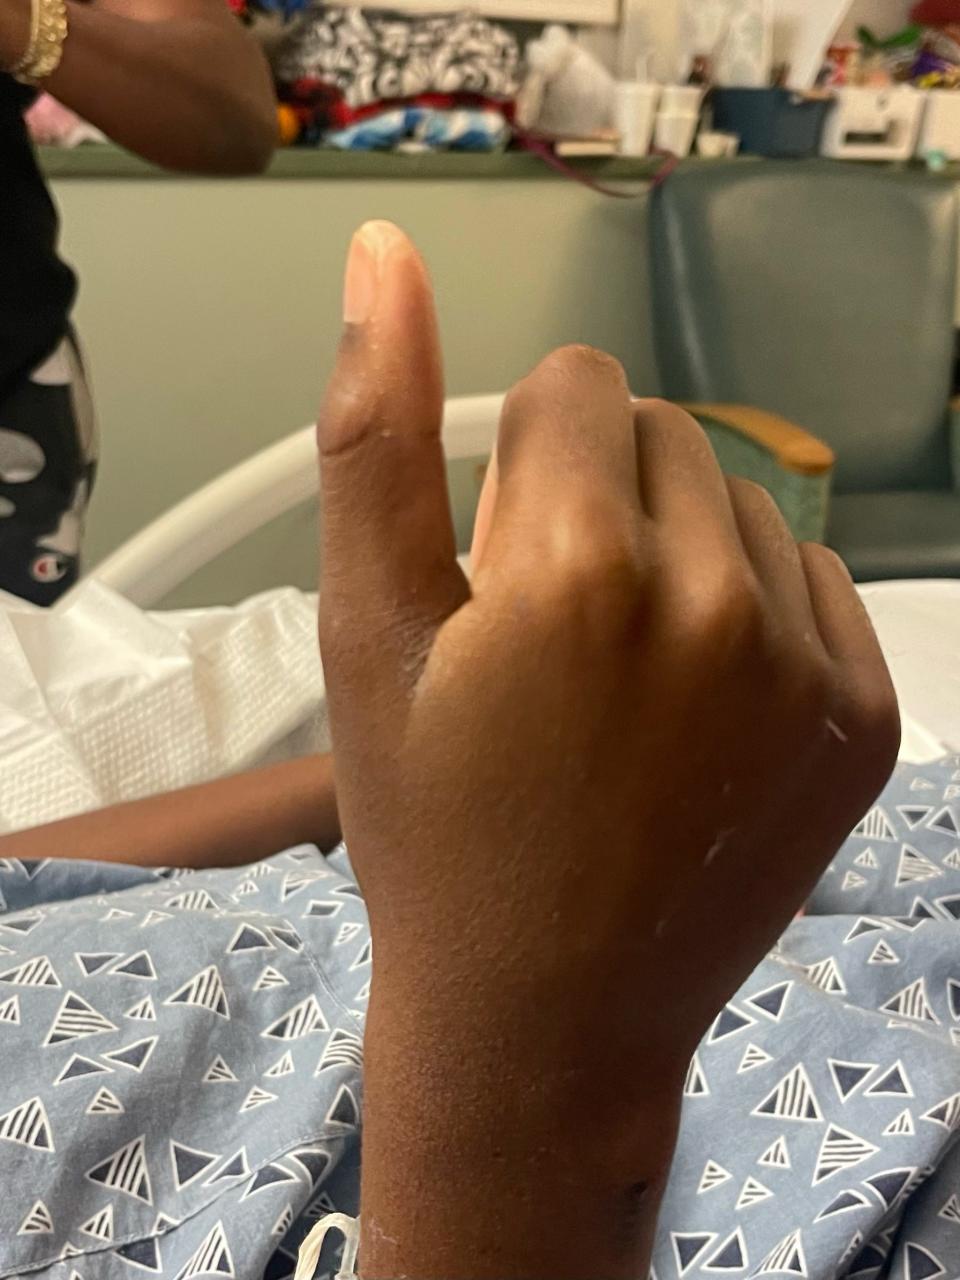 Kamauri Curry, an eighth grader, offers a thumbs up from his hospital bed. He was one of three survivors in a shooting that left three dead at a Palm Bay apartment complex.